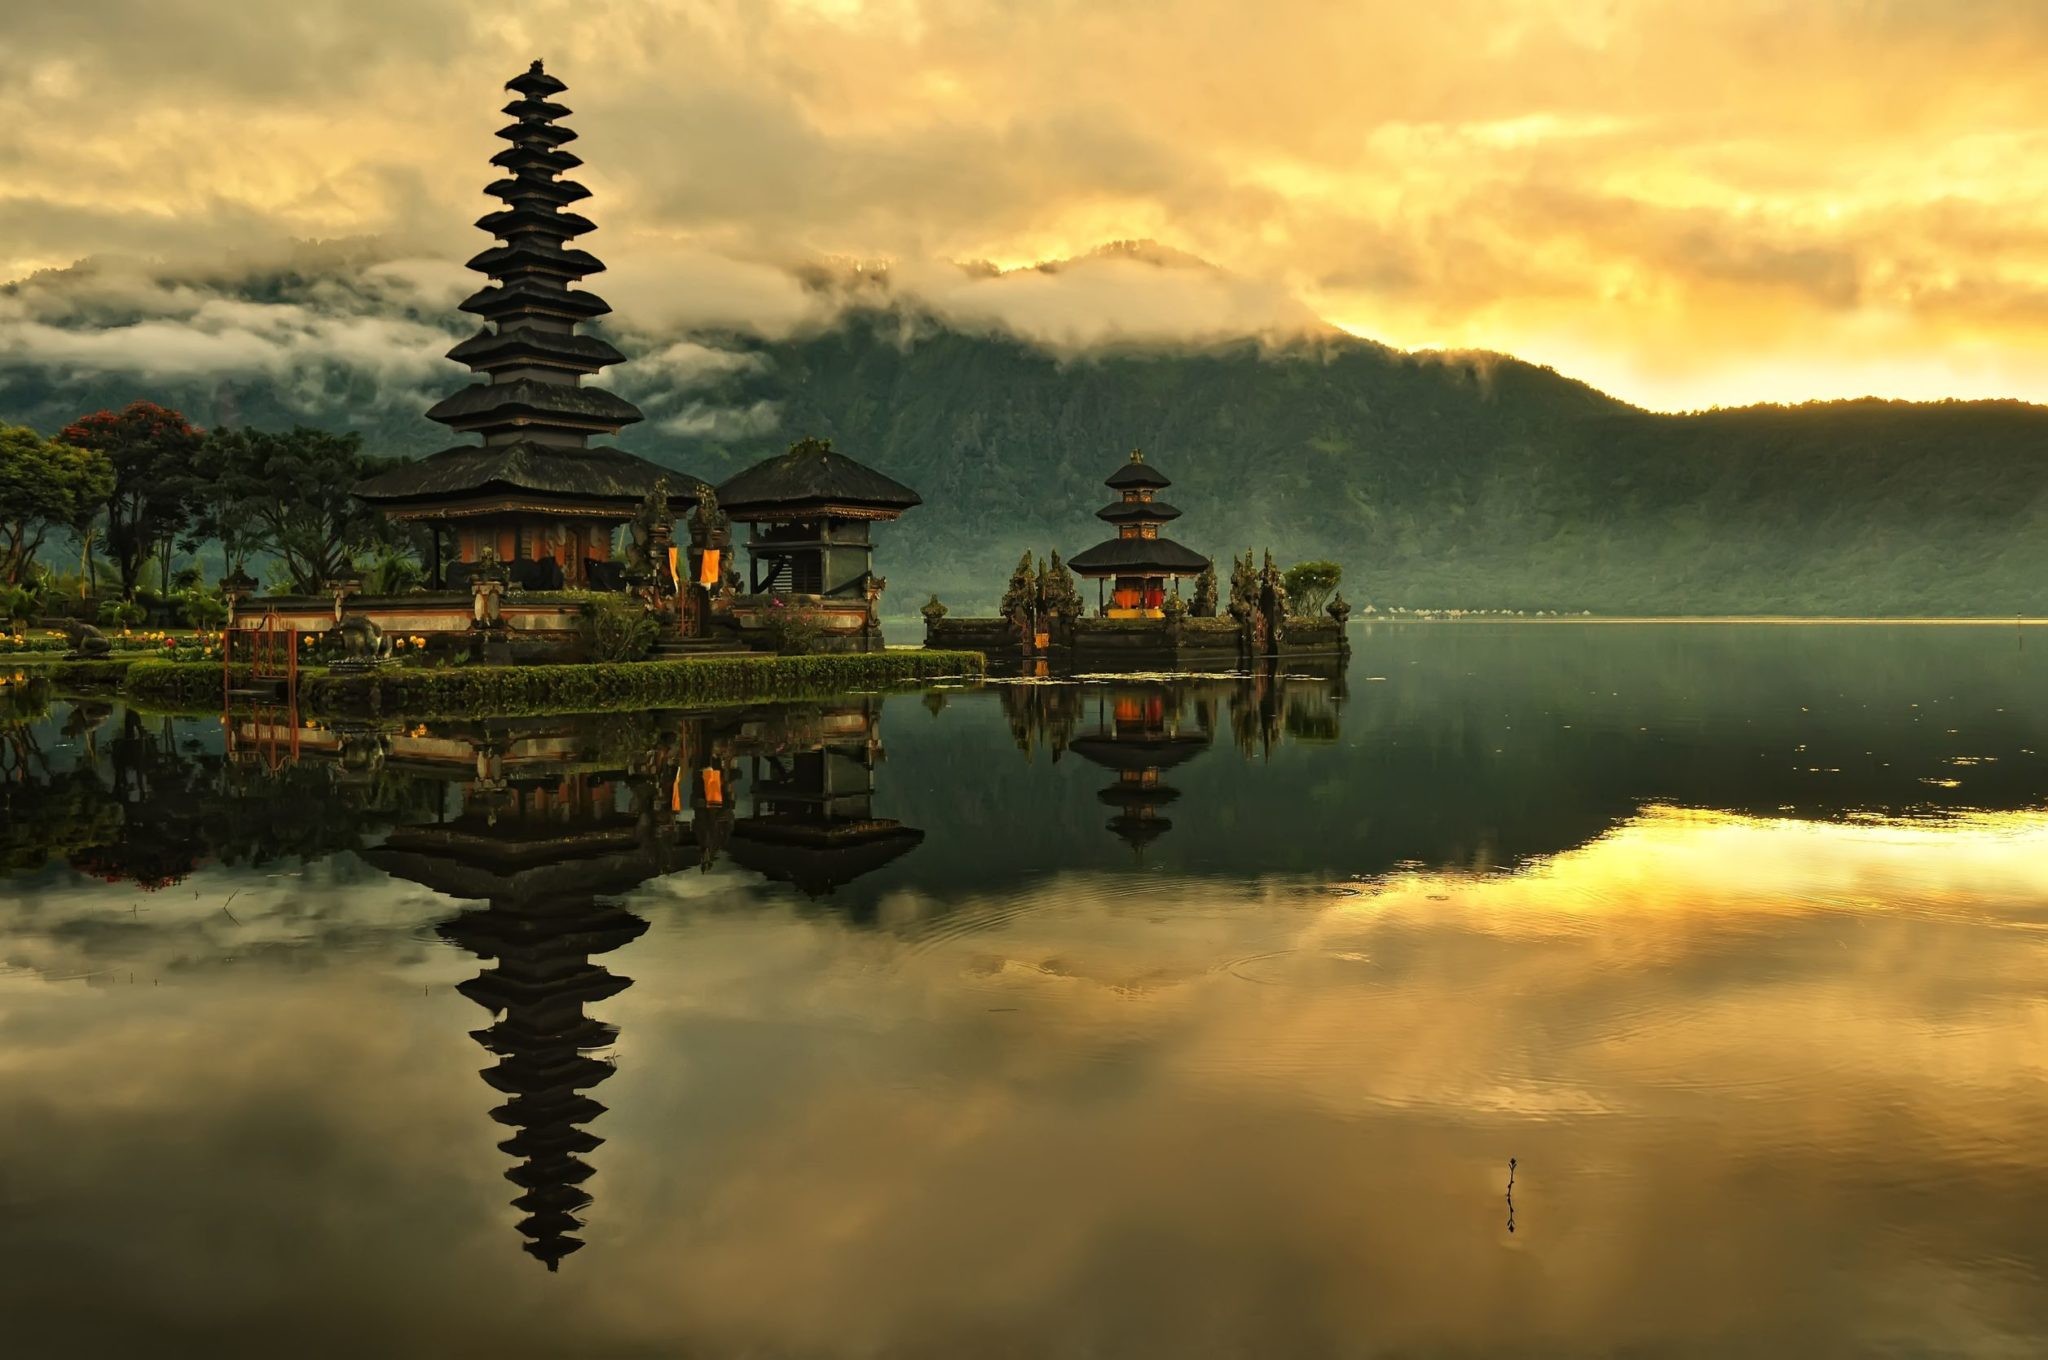 nature, Landscape, Water, Indonesia, Bali, Island, Lake, Temple, Asian architecture, Clouds, Sunrise, Mist, Trees, Mountains, Hills, Forest, Reflection, Morning Wallpaper